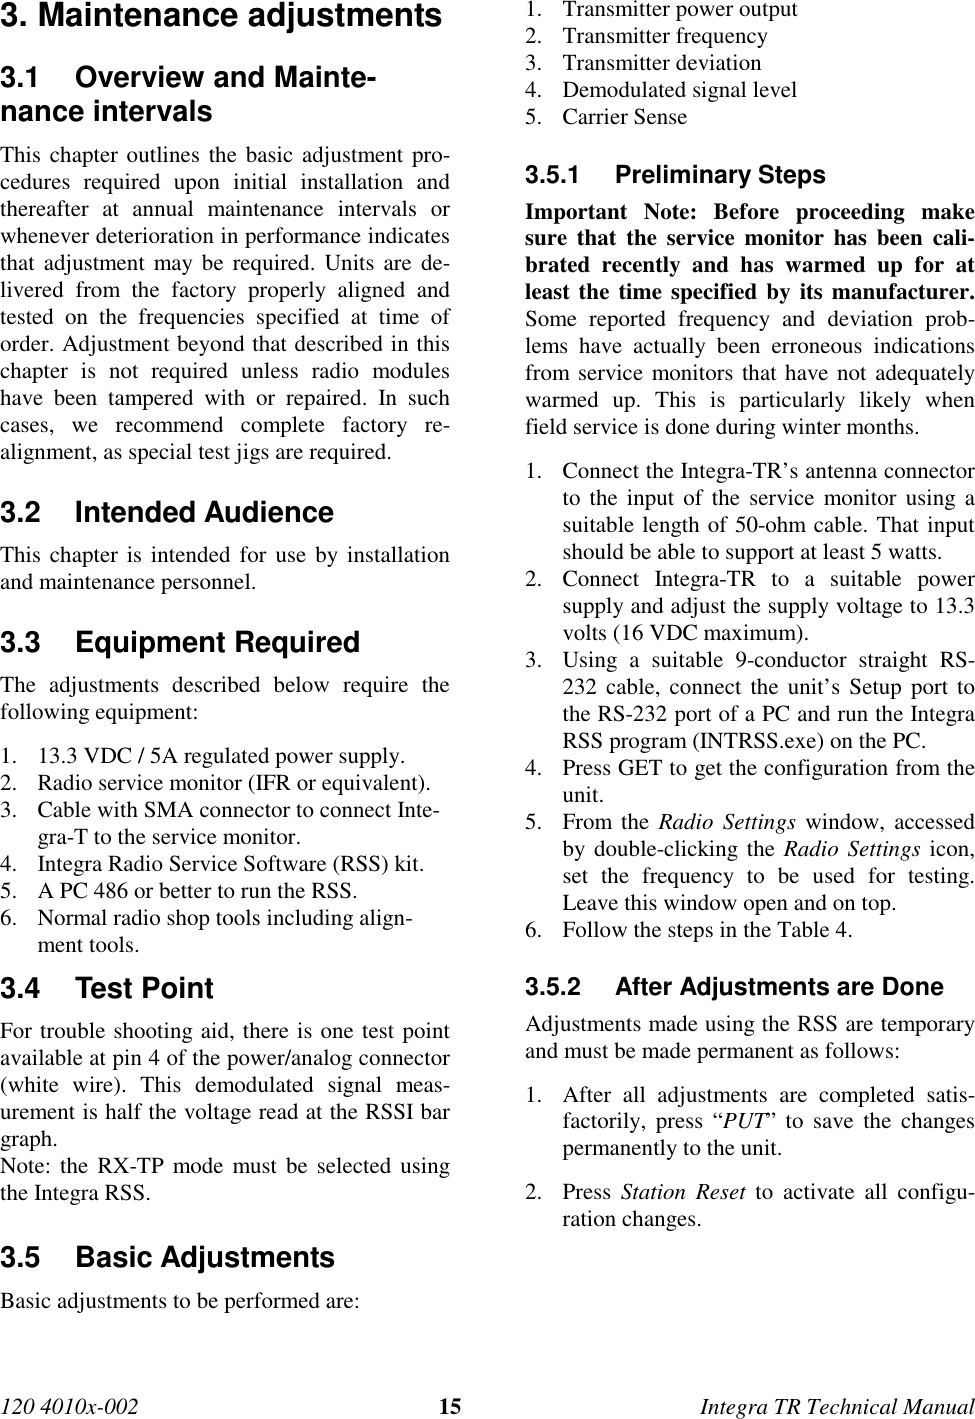 120 4010x-002 15 Integra TR Technical Manual3. Maintenance adjustments3.1  Overview and Mainte-nance intervalsThis chapter outlines the basic adjustment pro-cedures required upon initial installation andthereafter at annual maintenance intervals orwhenever deterioration in performance indicatesthat adjustment may be required. Units are de-livered from the factory properly aligned andtested on the frequencies specified at time oforder. Adjustment beyond that described in thischapter is not required unless radio moduleshave been tampered with or repaired. In suchcases, we recommend complete factory re-alignment, as special test jigs are required.3.2 Intended AudienceThis chapter is intended for use by installationand maintenance personnel.3.3 Equipment RequiredThe adjustments described below require thefollowing equipment:1. 13.3 VDC / 5A regulated power supply.2. Radio service monitor (IFR or equivalent).3. Cable with SMA connector to connect Inte-gra-T to the service monitor.4. Integra Radio Service Software (RSS) kit.5. A PC 486 or better to run the RSS.6. Normal radio shop tools including align-ment tools.3.4 Test PointFor trouble shooting aid, there is one test pointavailable at pin 4 of the power/analog connector(white wire). This demodulated signal meas-urement is half the voltage read at the RSSI bargraph.Note: the RX-TP mode must be selected usingthe Integra RSS.3.5 Basic AdjustmentsBasic adjustments to be performed are:1. Transmitter power output2. Transmitter frequency3. Transmitter deviation4. Demodulated signal level5. Carrier Sense3.5.1 Preliminary StepsImportant Note: Before proceeding makesure that the service monitor has been cali-brated recently and has warmed up for atleast the time specified by its manufacturer.Some reported frequency and deviation prob-lems have actually been erroneous indicationsfrom service monitors that have not adequatelywarmed up. This is particularly likely whenfield service is done during winter months.1. Connect the Integra-TR’s antenna connectorto the input of the service monitor using asuitable length of 50-ohm cable. That inputshould be able to support at least 5 watts.2. Connect Integra-TR to a suitable powersupply and adjust the supply voltage to 13.3volts (16 VDC maximum).3. Using a suitable 9-conductor straight RS-232 cable, connect the unit’s Setup port tothe RS-232 port of a PC and run the IntegraRSS program (INTRSS.exe) on the PC.4. Press GET to get the configuration from theunit.5. From the Radio Settings window, accessedby double-clicking the Radio Settings icon,set the frequency to be used for testing.Leave this window open and on top.6. Follow the steps in the Table 4.3.5.2  After Adjustments are DoneAdjustments made using the RSS are temporaryand must be made permanent as follows:1. After all adjustments are completed satis-factorily, press “PUT” to save the changespermanently to the unit.2. Press  Station Reset to activate all configu-ration changes.